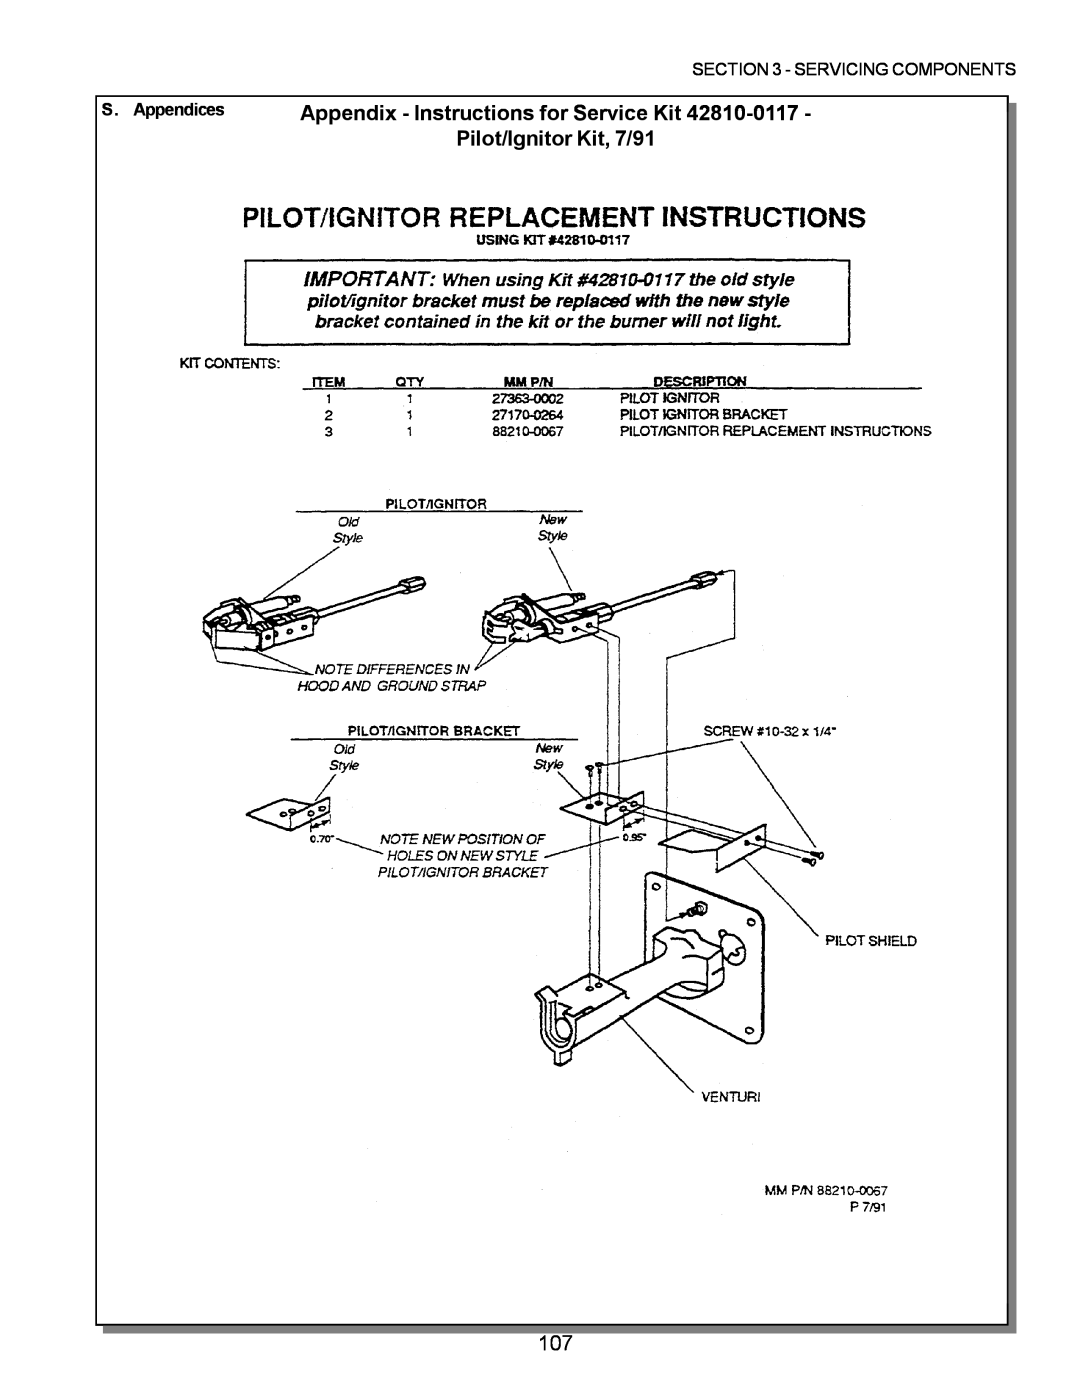 Middleby Marshall PS570, PS360, PS200, PS555 Appendix - Instructions for Service Kit Pilot/Ignitor Kit, 7/91, S. Appendices 